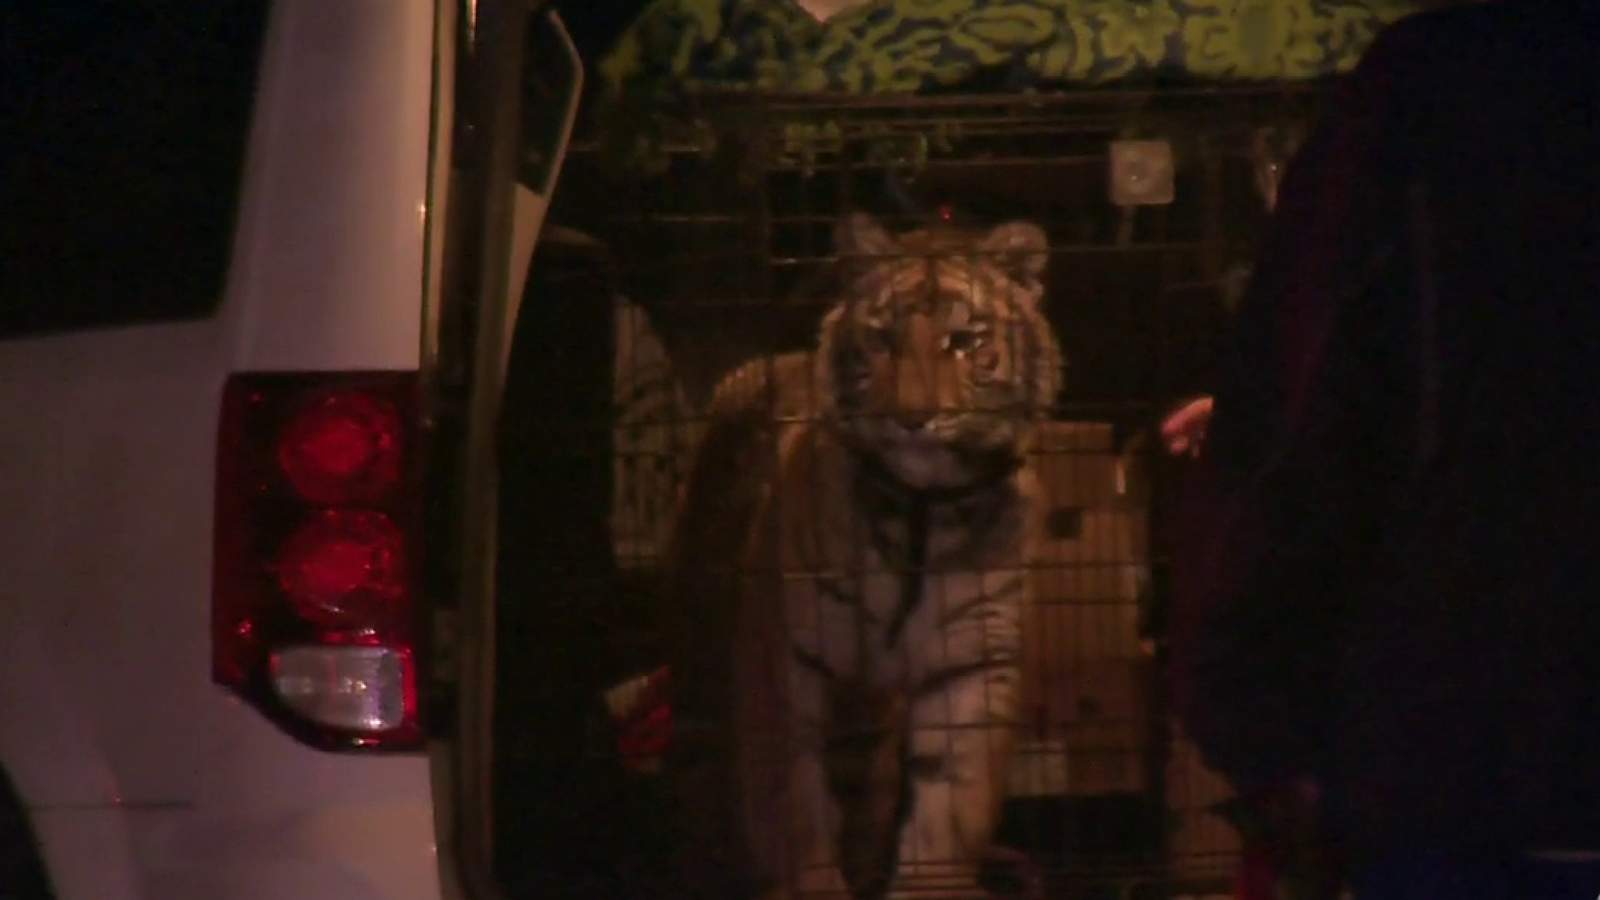 Tiger seized by BCSO during winter storm now ‘on her way to the next chapter’ at North Texas ranch